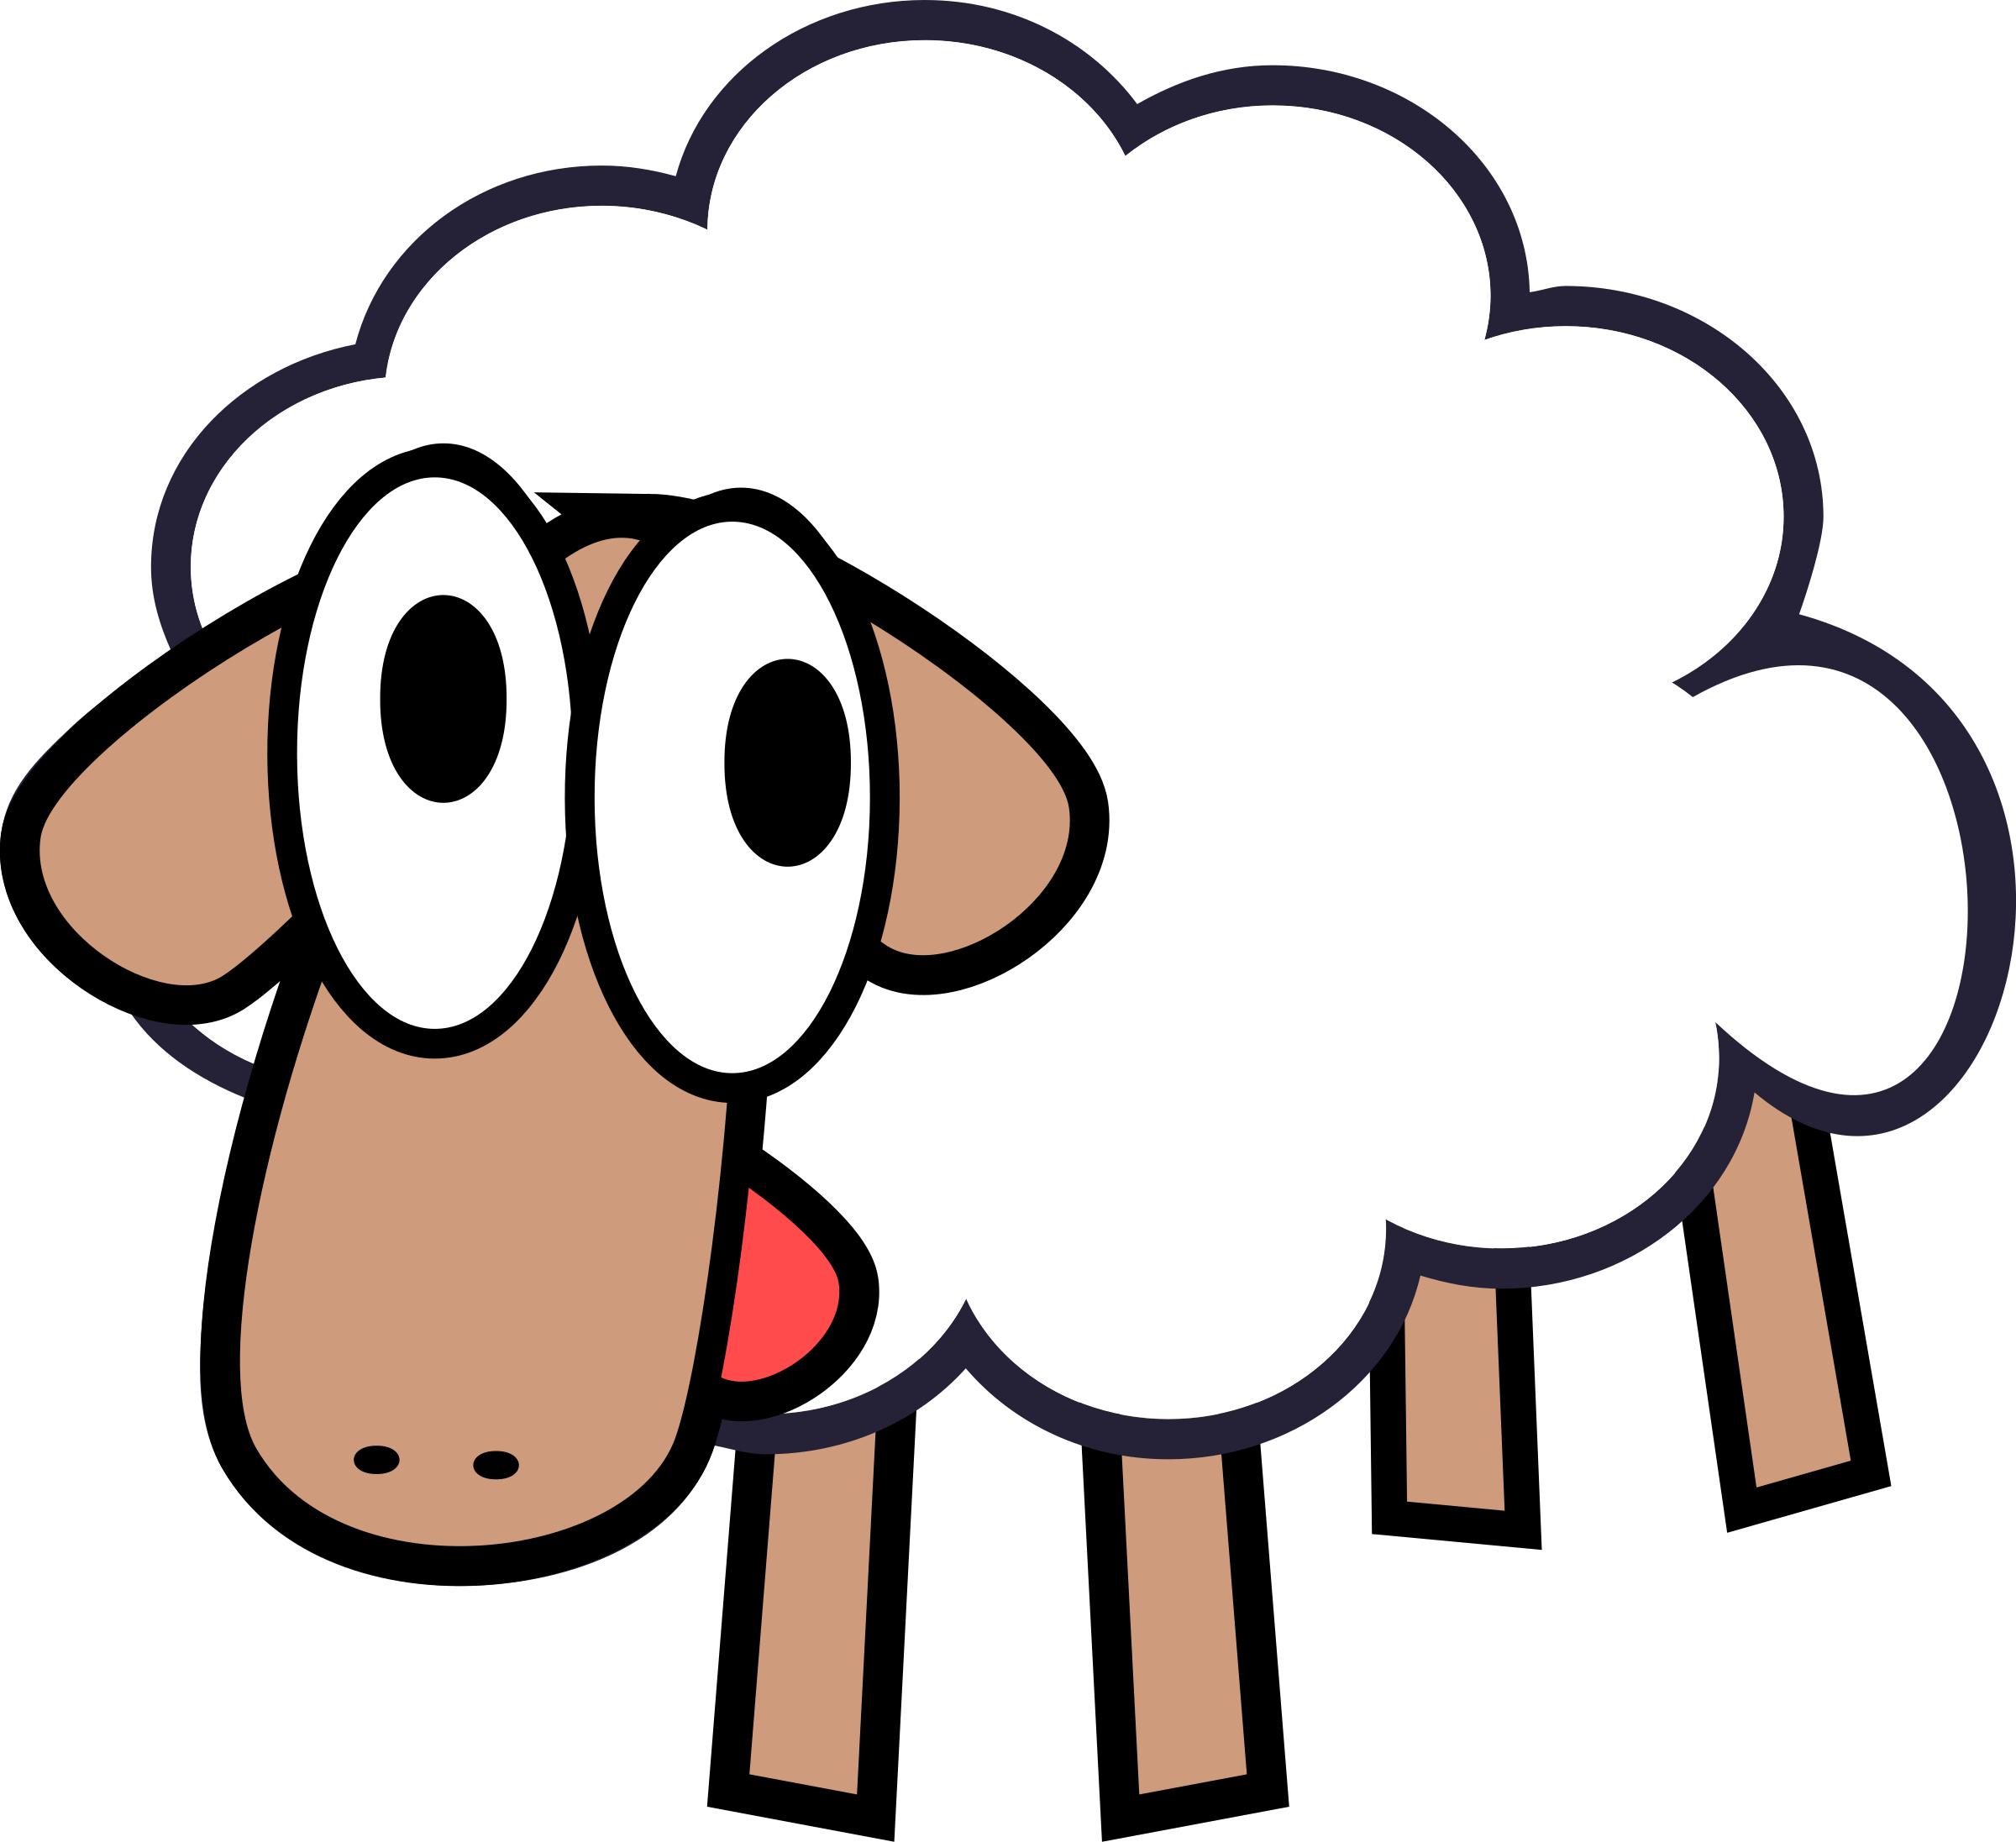 White Stupid & Cute Cartoon Sheep Icons PNG - Free PNG and Icons Downloads